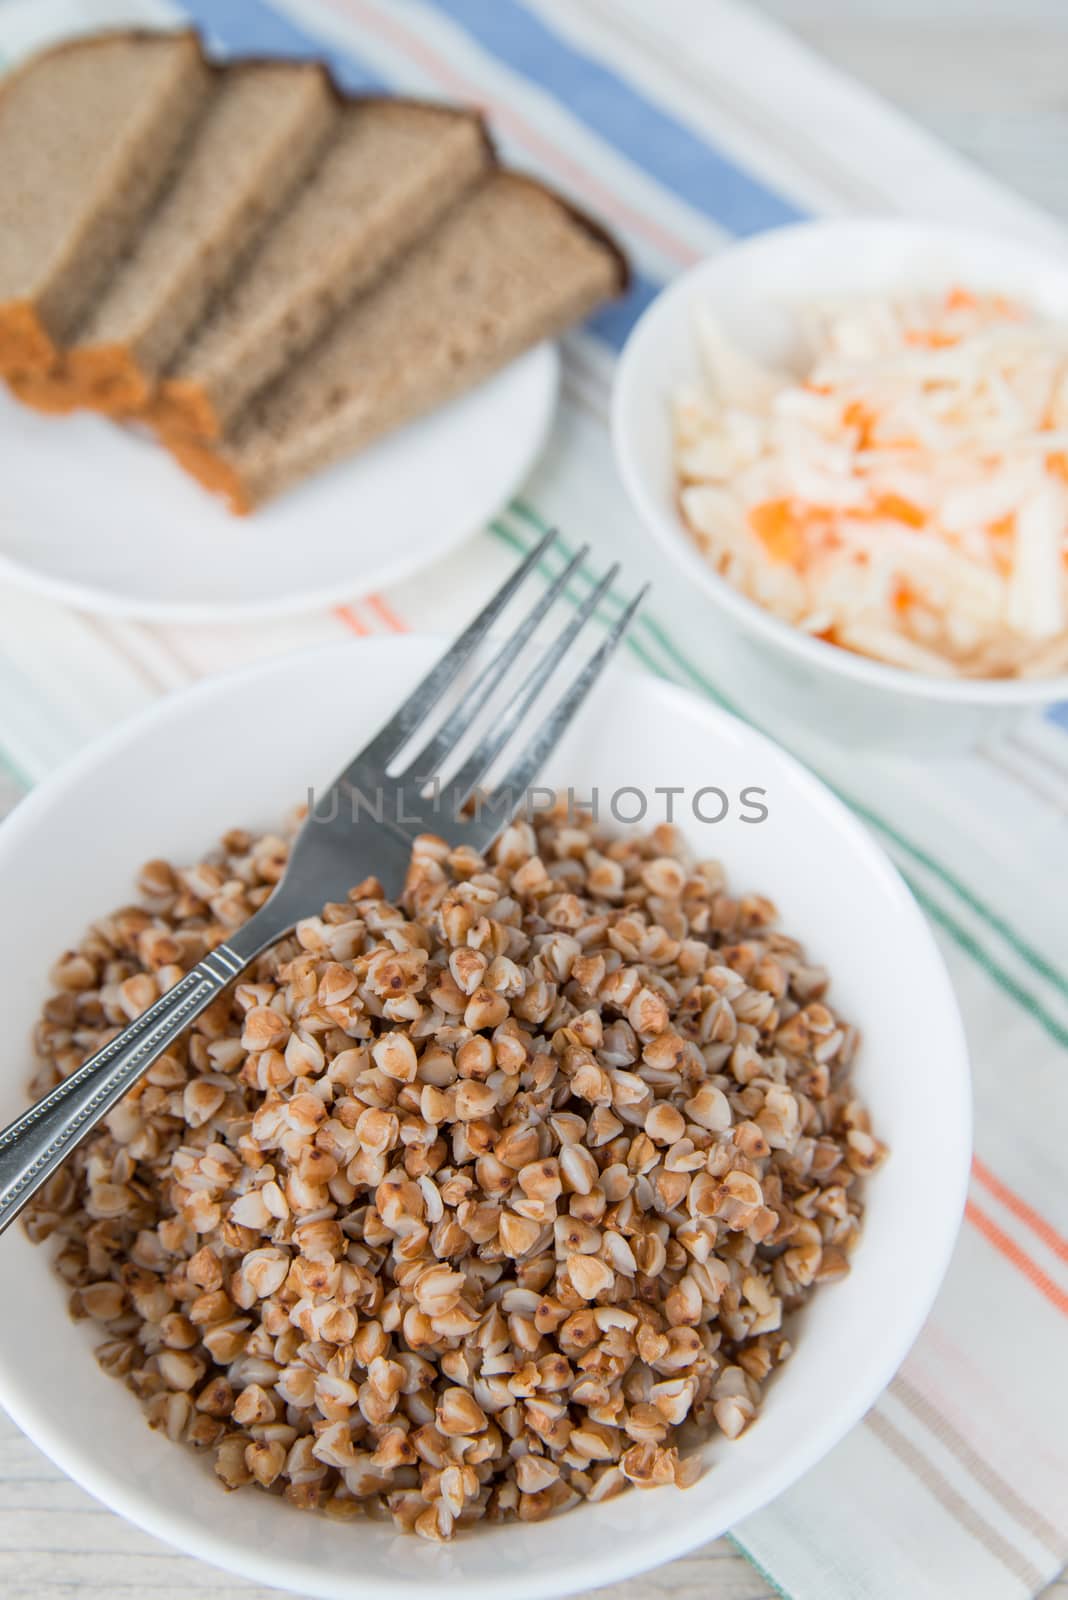 Dinner with the buckwheat cereals and sauerkraut